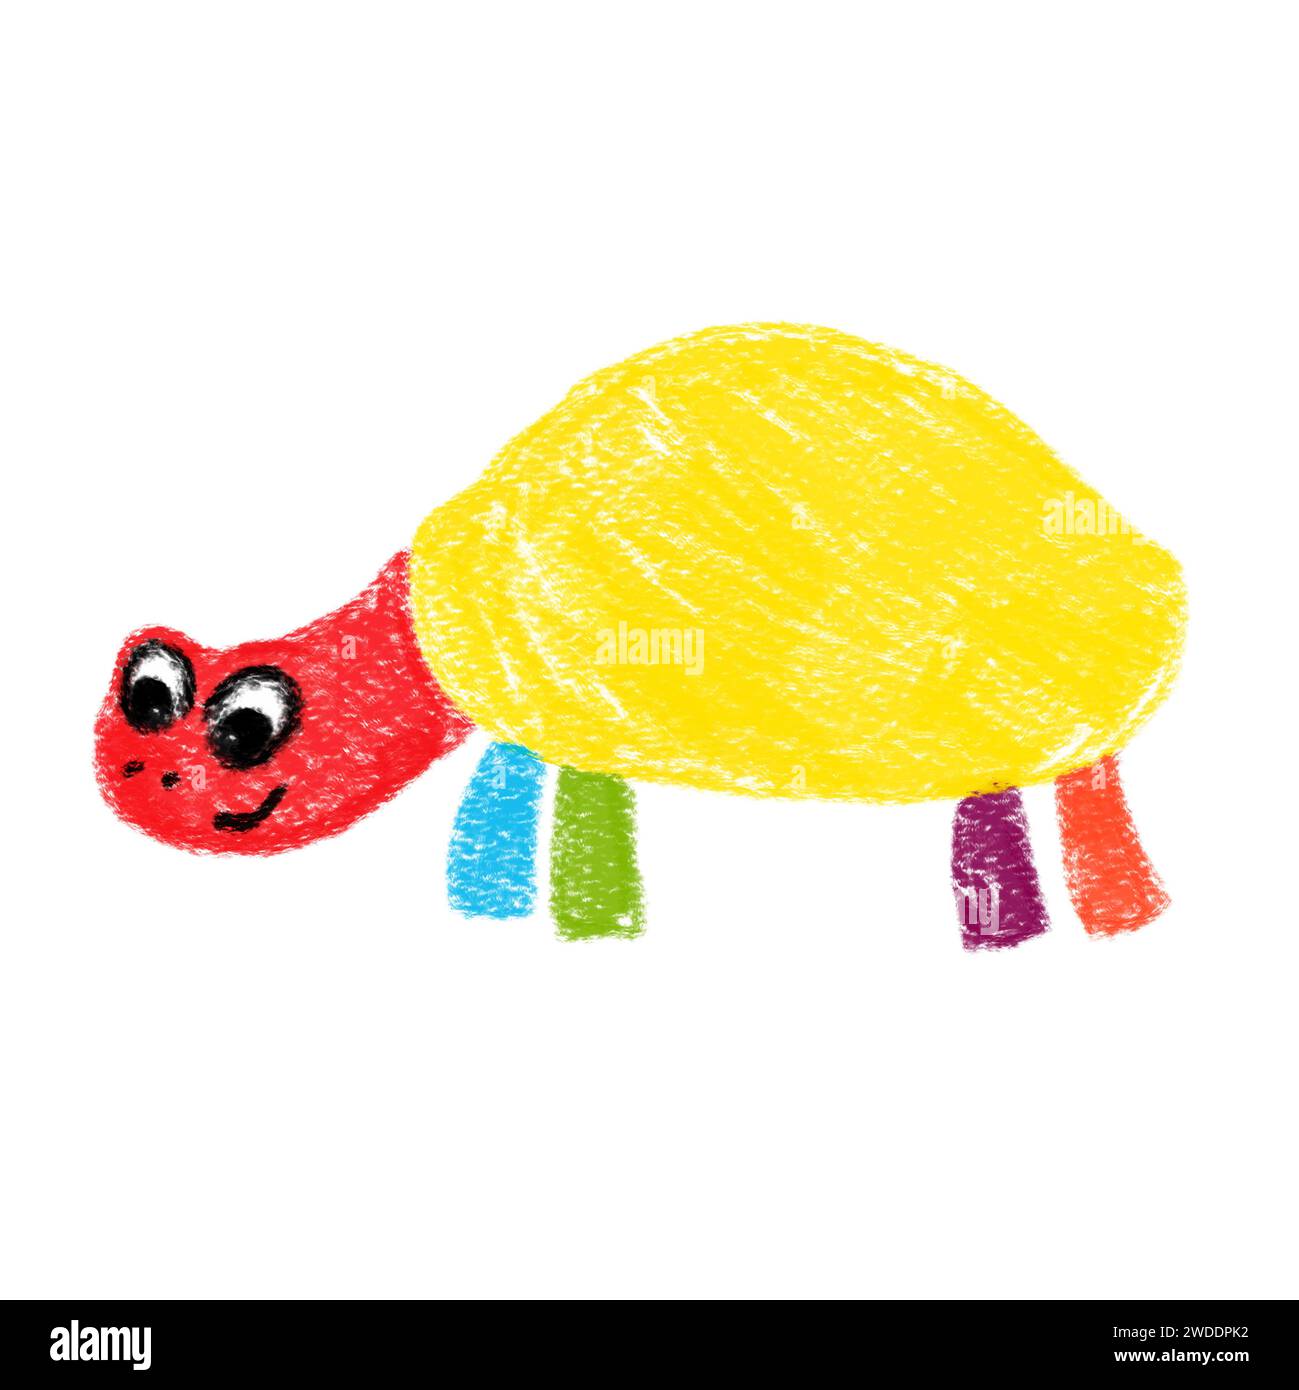 Hand-drawn simple colorful turtle on white background. Kid's drawings using pencil technique. Isolated images. For design and card Stock Photo